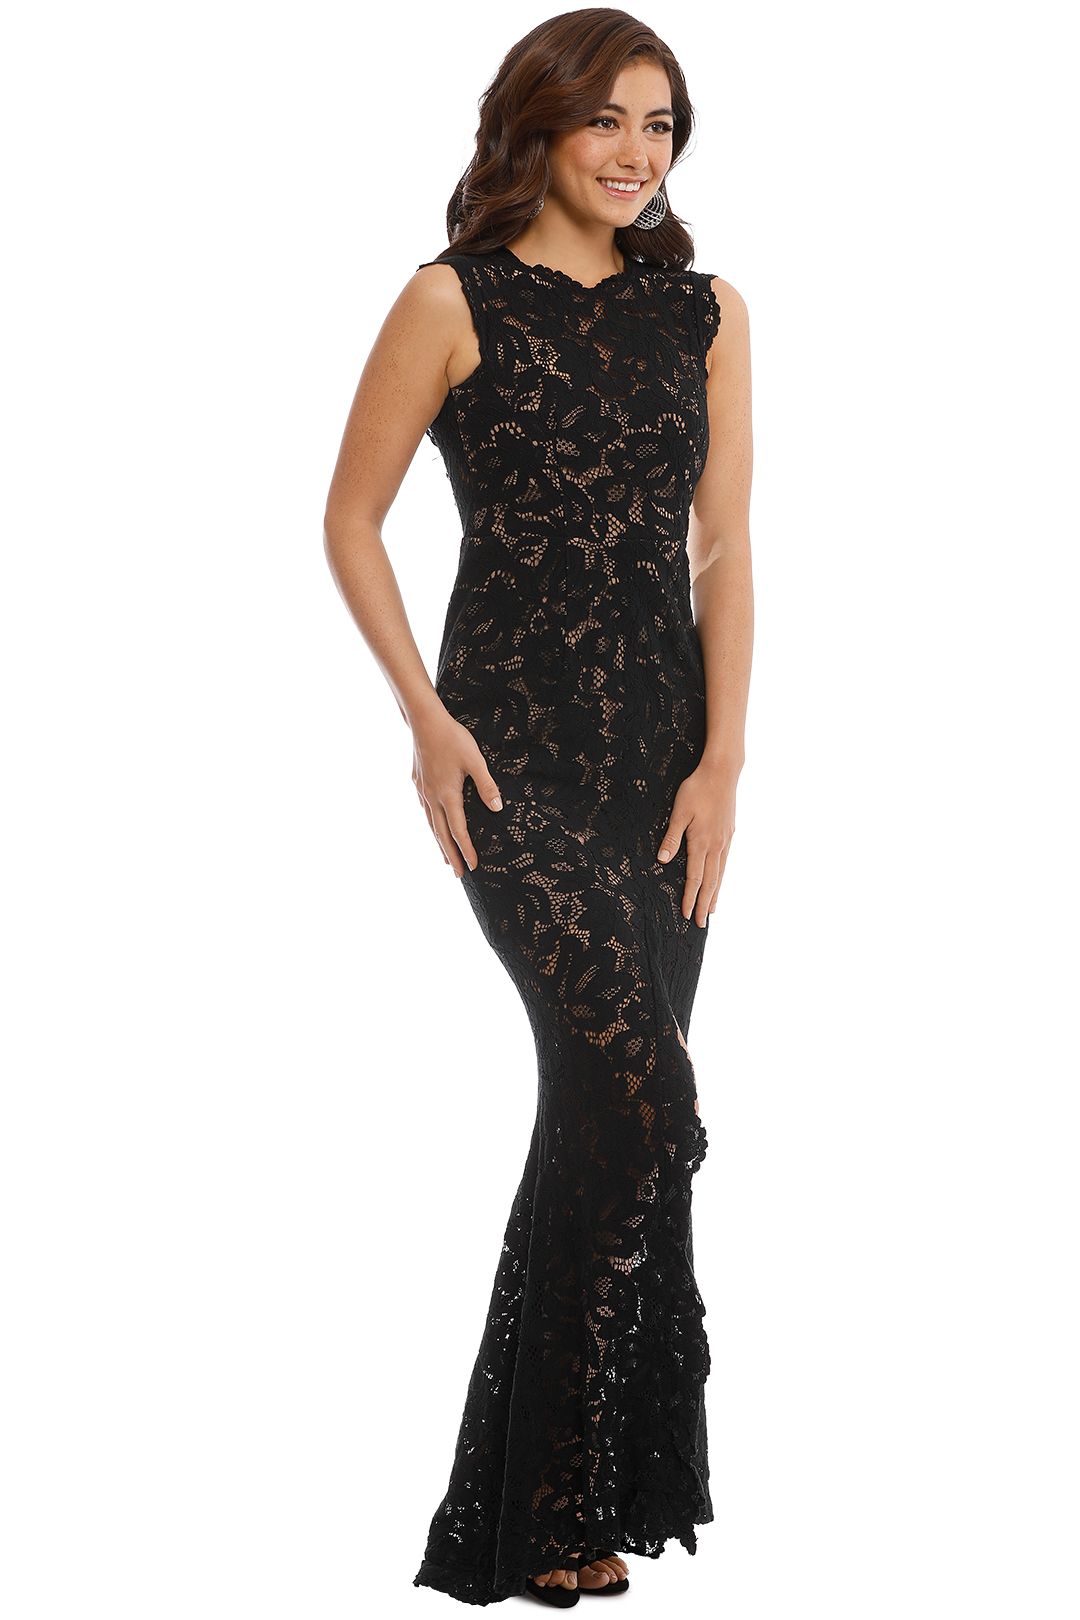 Grace and Hart - Valentine Gown - Black - Side